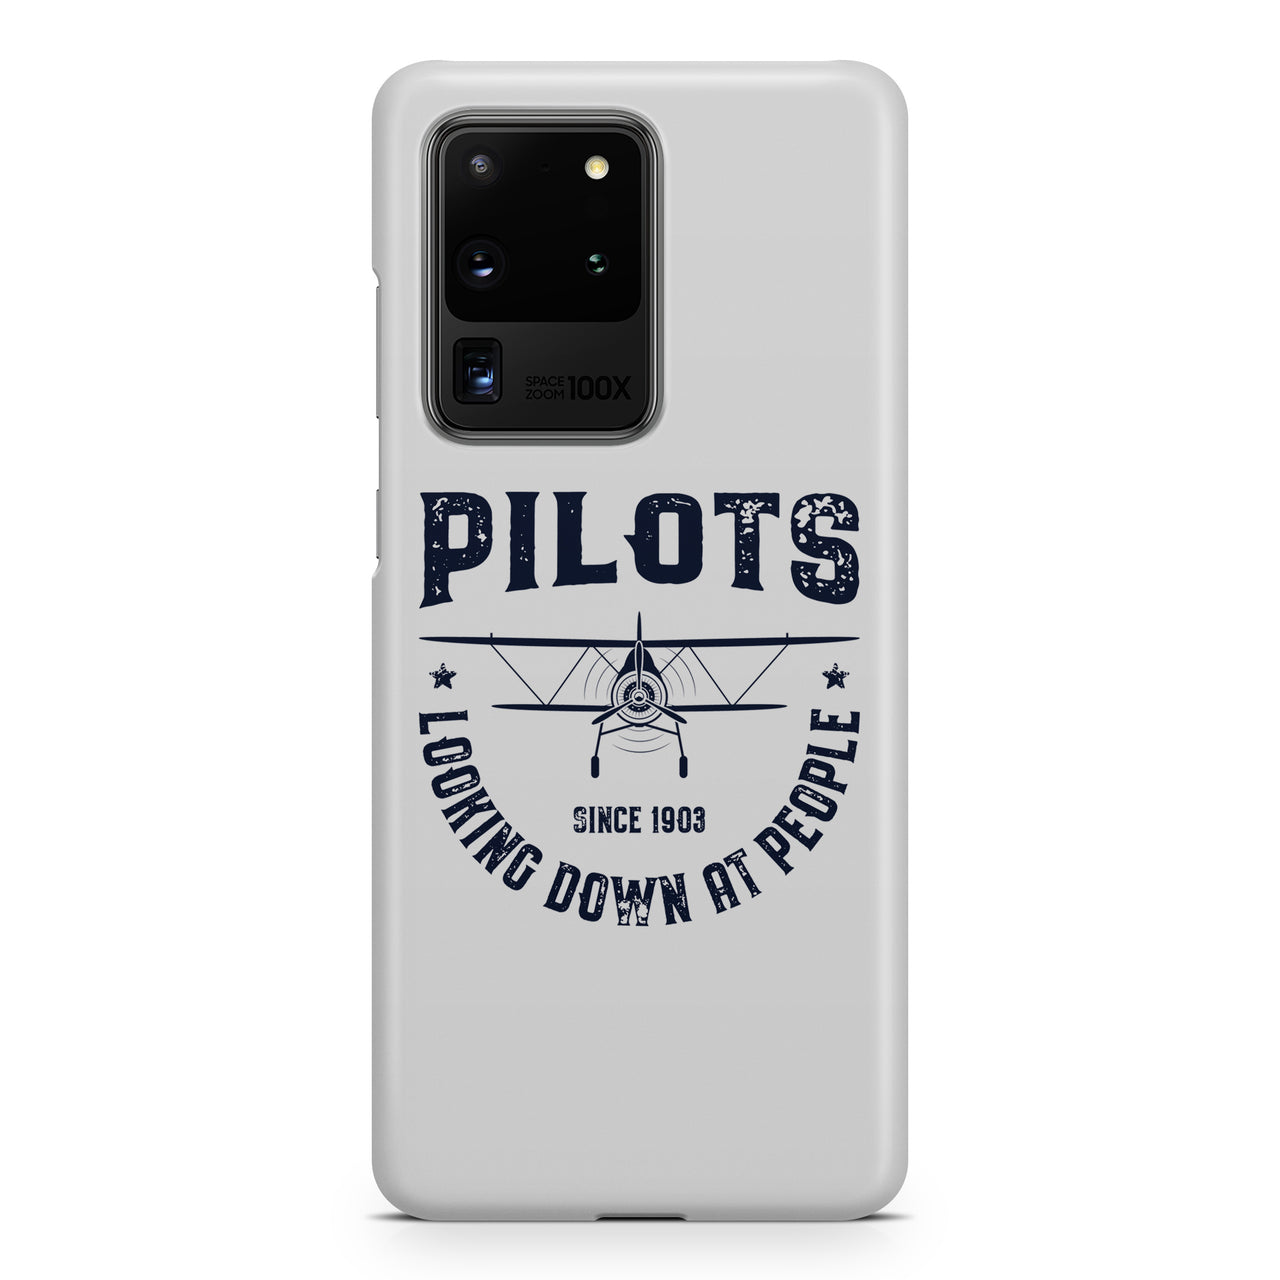 Pilots Looking Down at People Since 1903 Samsung A Cases